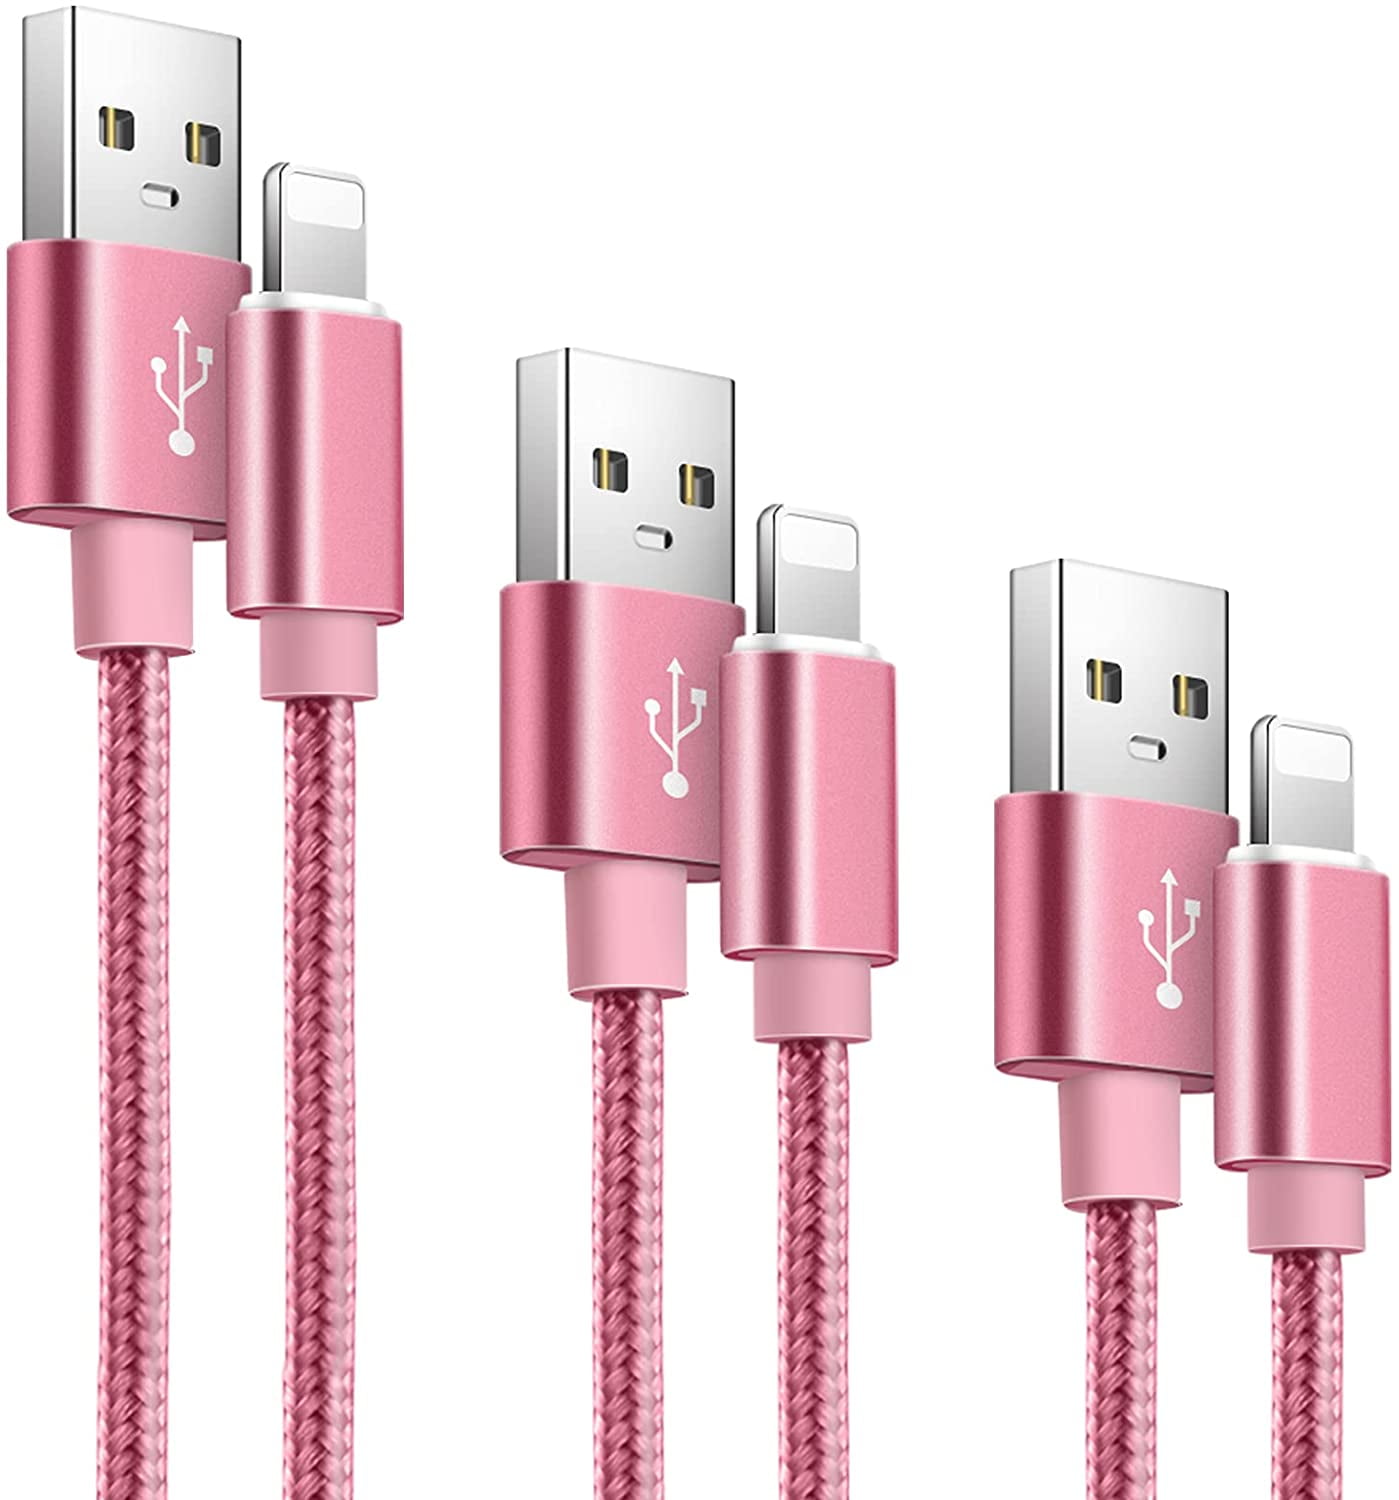 Apple MFi Certified 2pack ] iPhone Charger 6ft,Lightning Cable Long 6 Foot  Cord, Fast Charging Cables for Apple iPhone 12/11/11Pro/11Max/ X/XS/XR/XS  Max/8/7/6/5S/SE/iPad Mini Air (Rose Gold) - Walmart.com